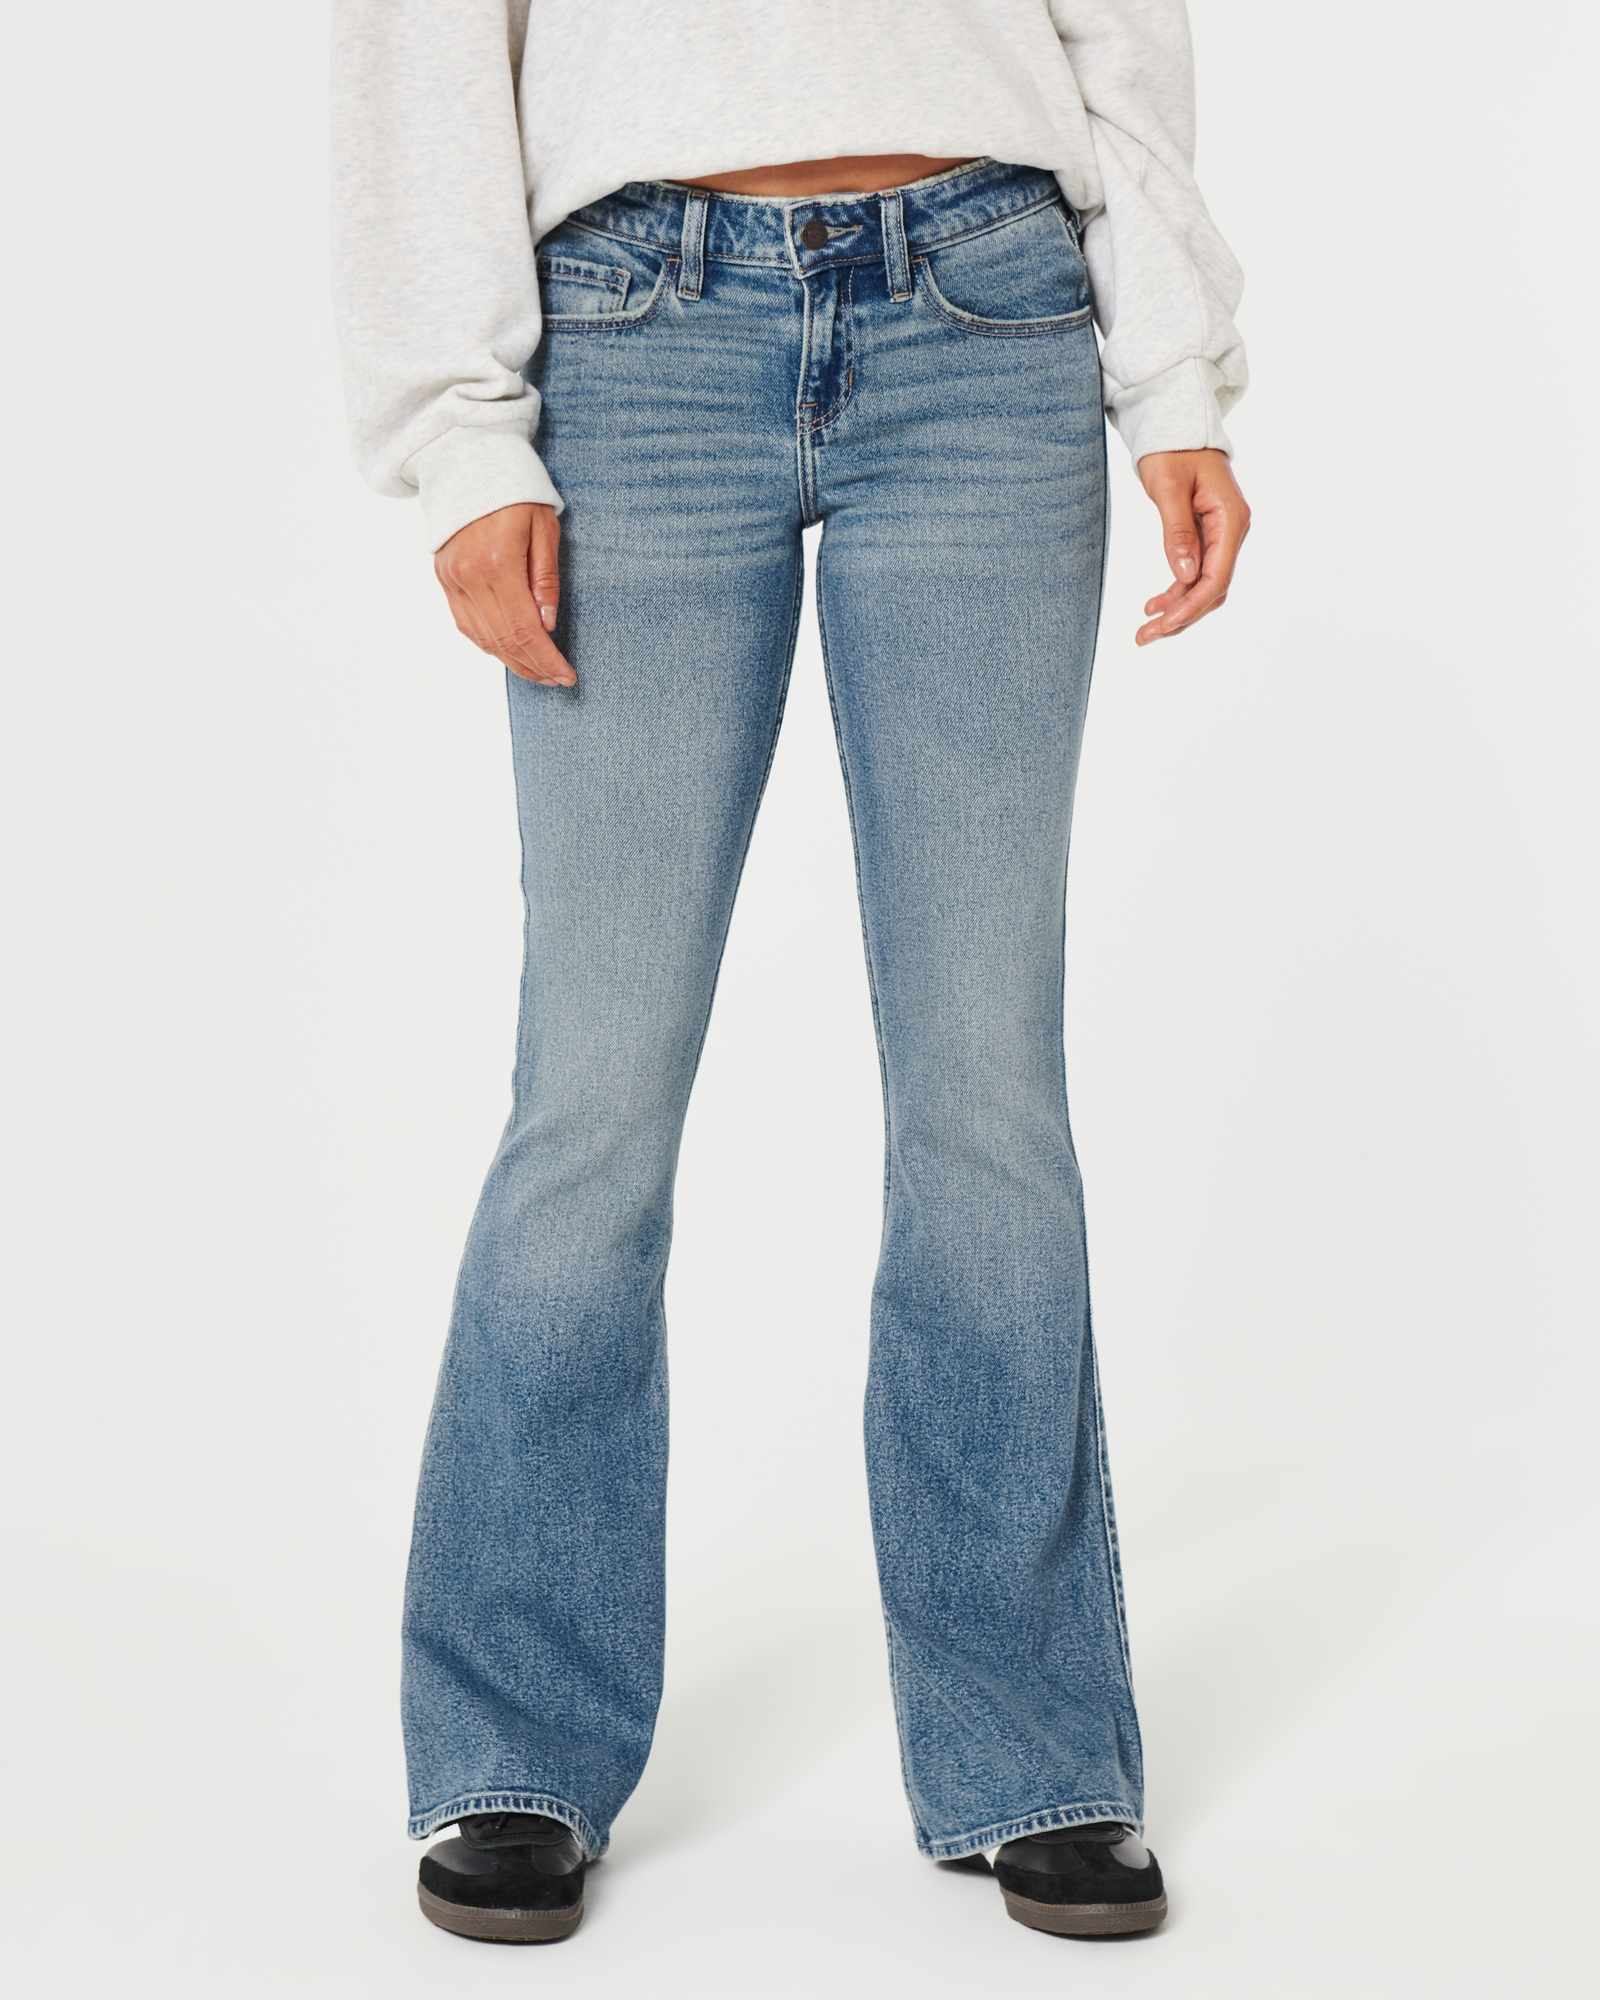 Women's Low-Rise Medium Wash Vintage Flare Jeans, Women's Clearance